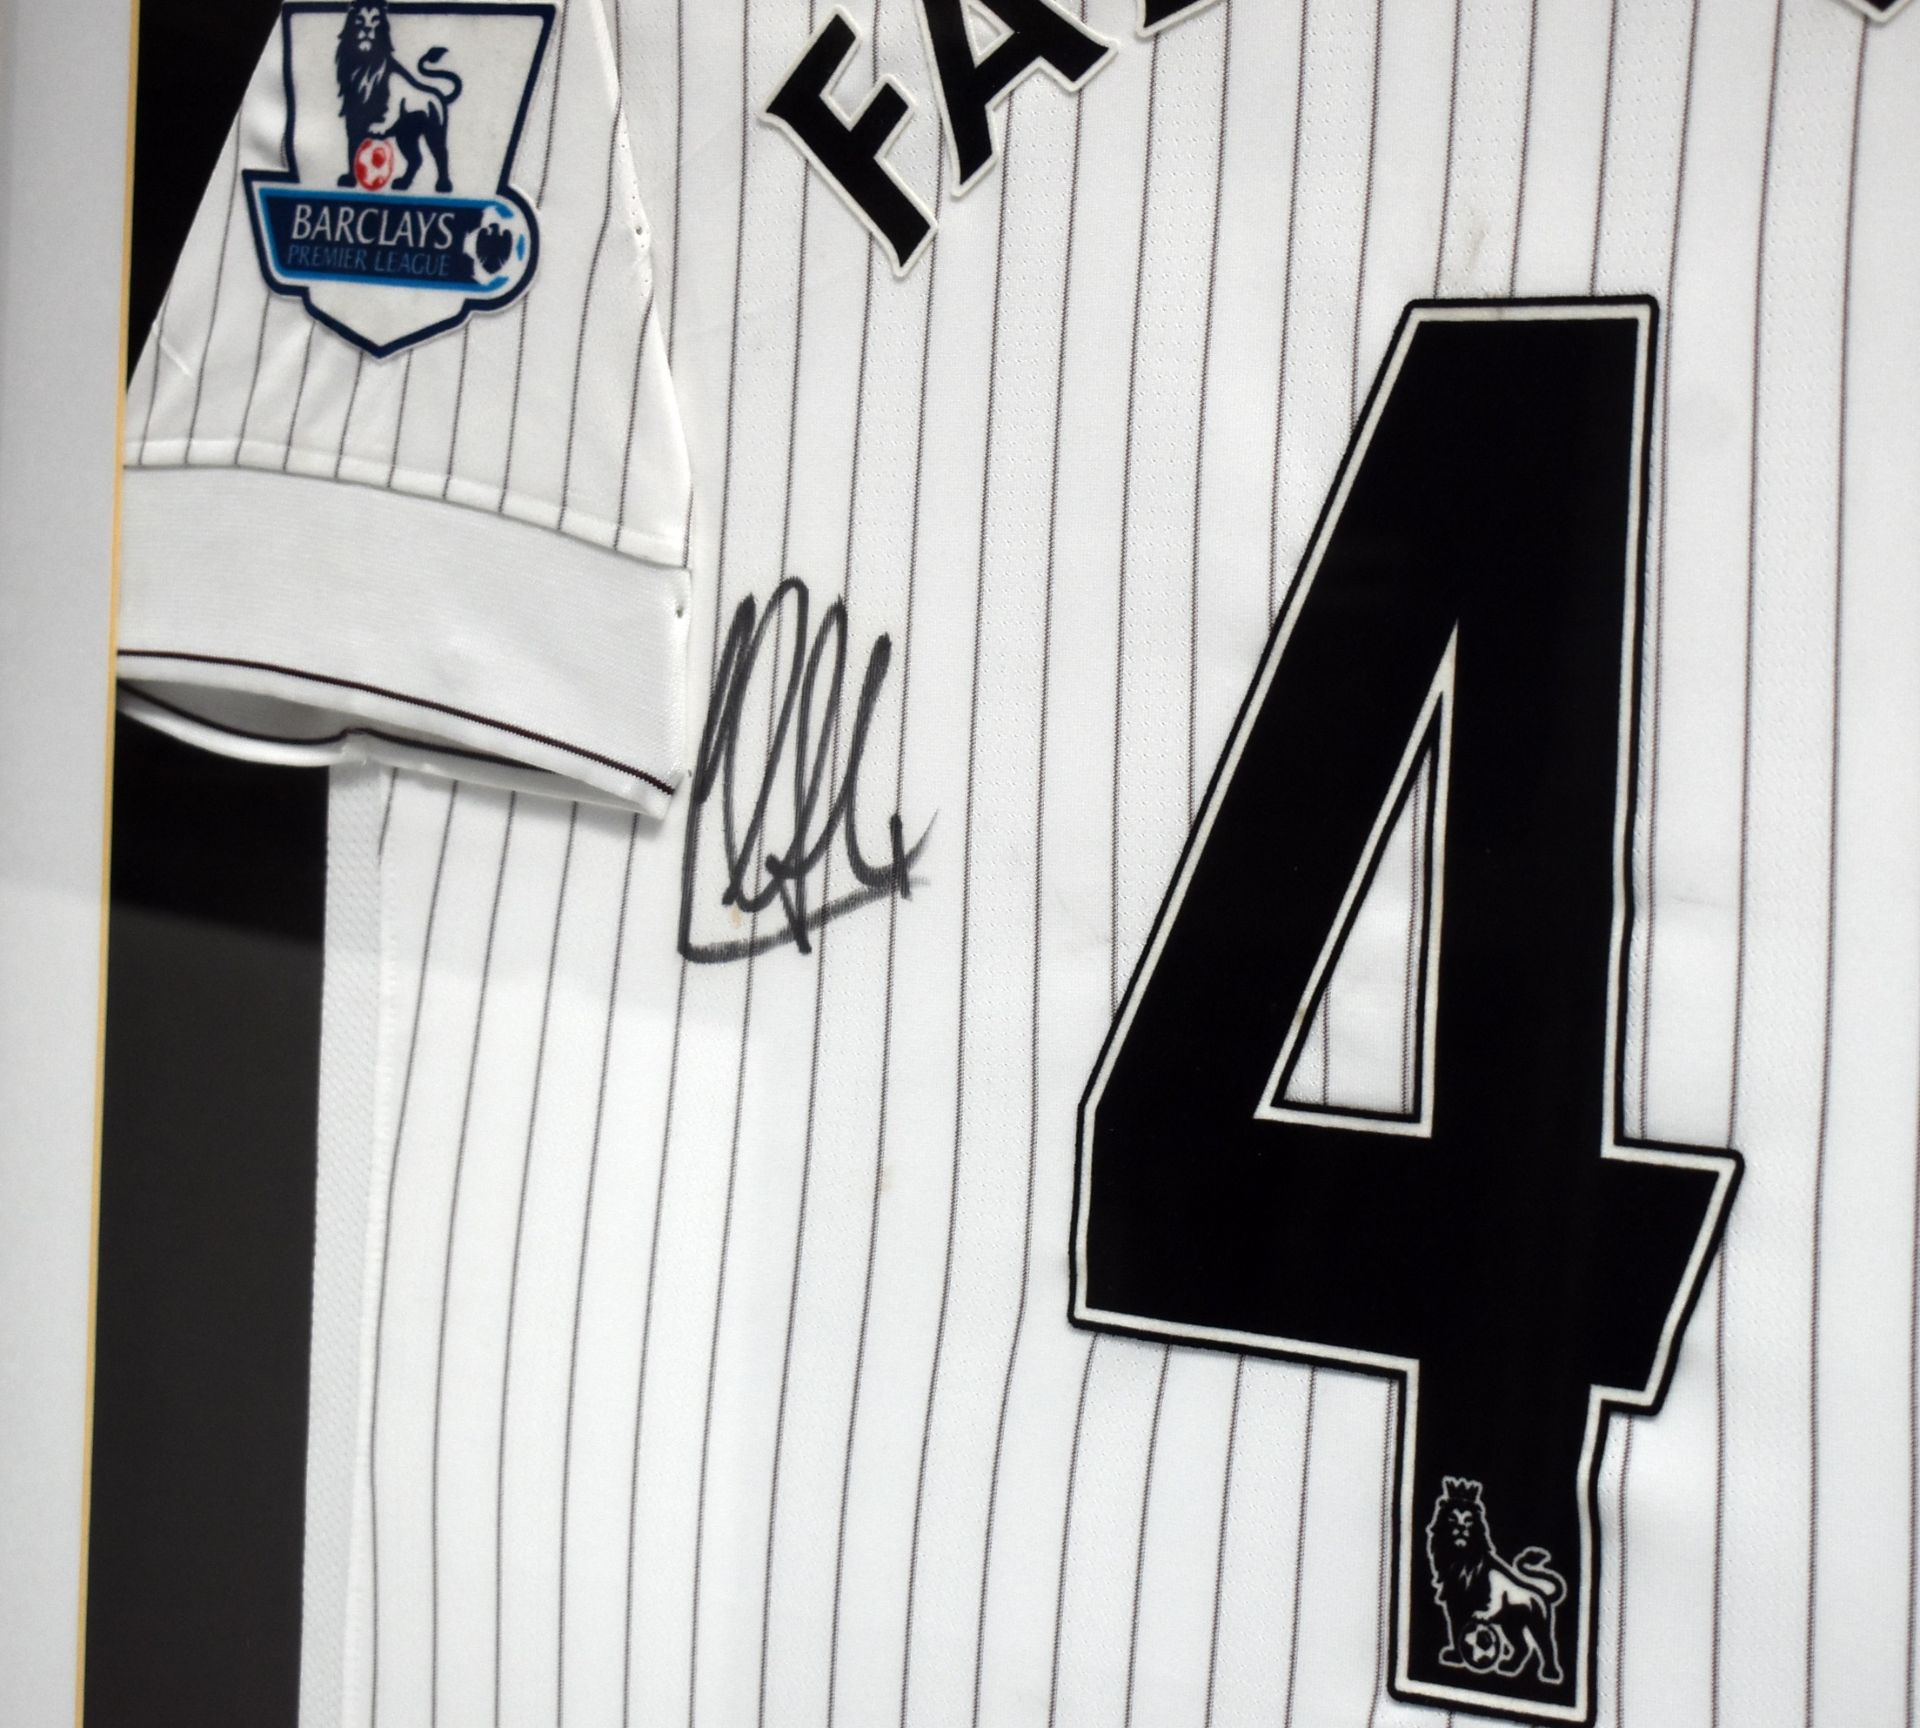 1 x Autographed ARSENAL Football Shirt, Signed By CESC FABREGAS - Circa 2009-2010 - Image 3 of 6